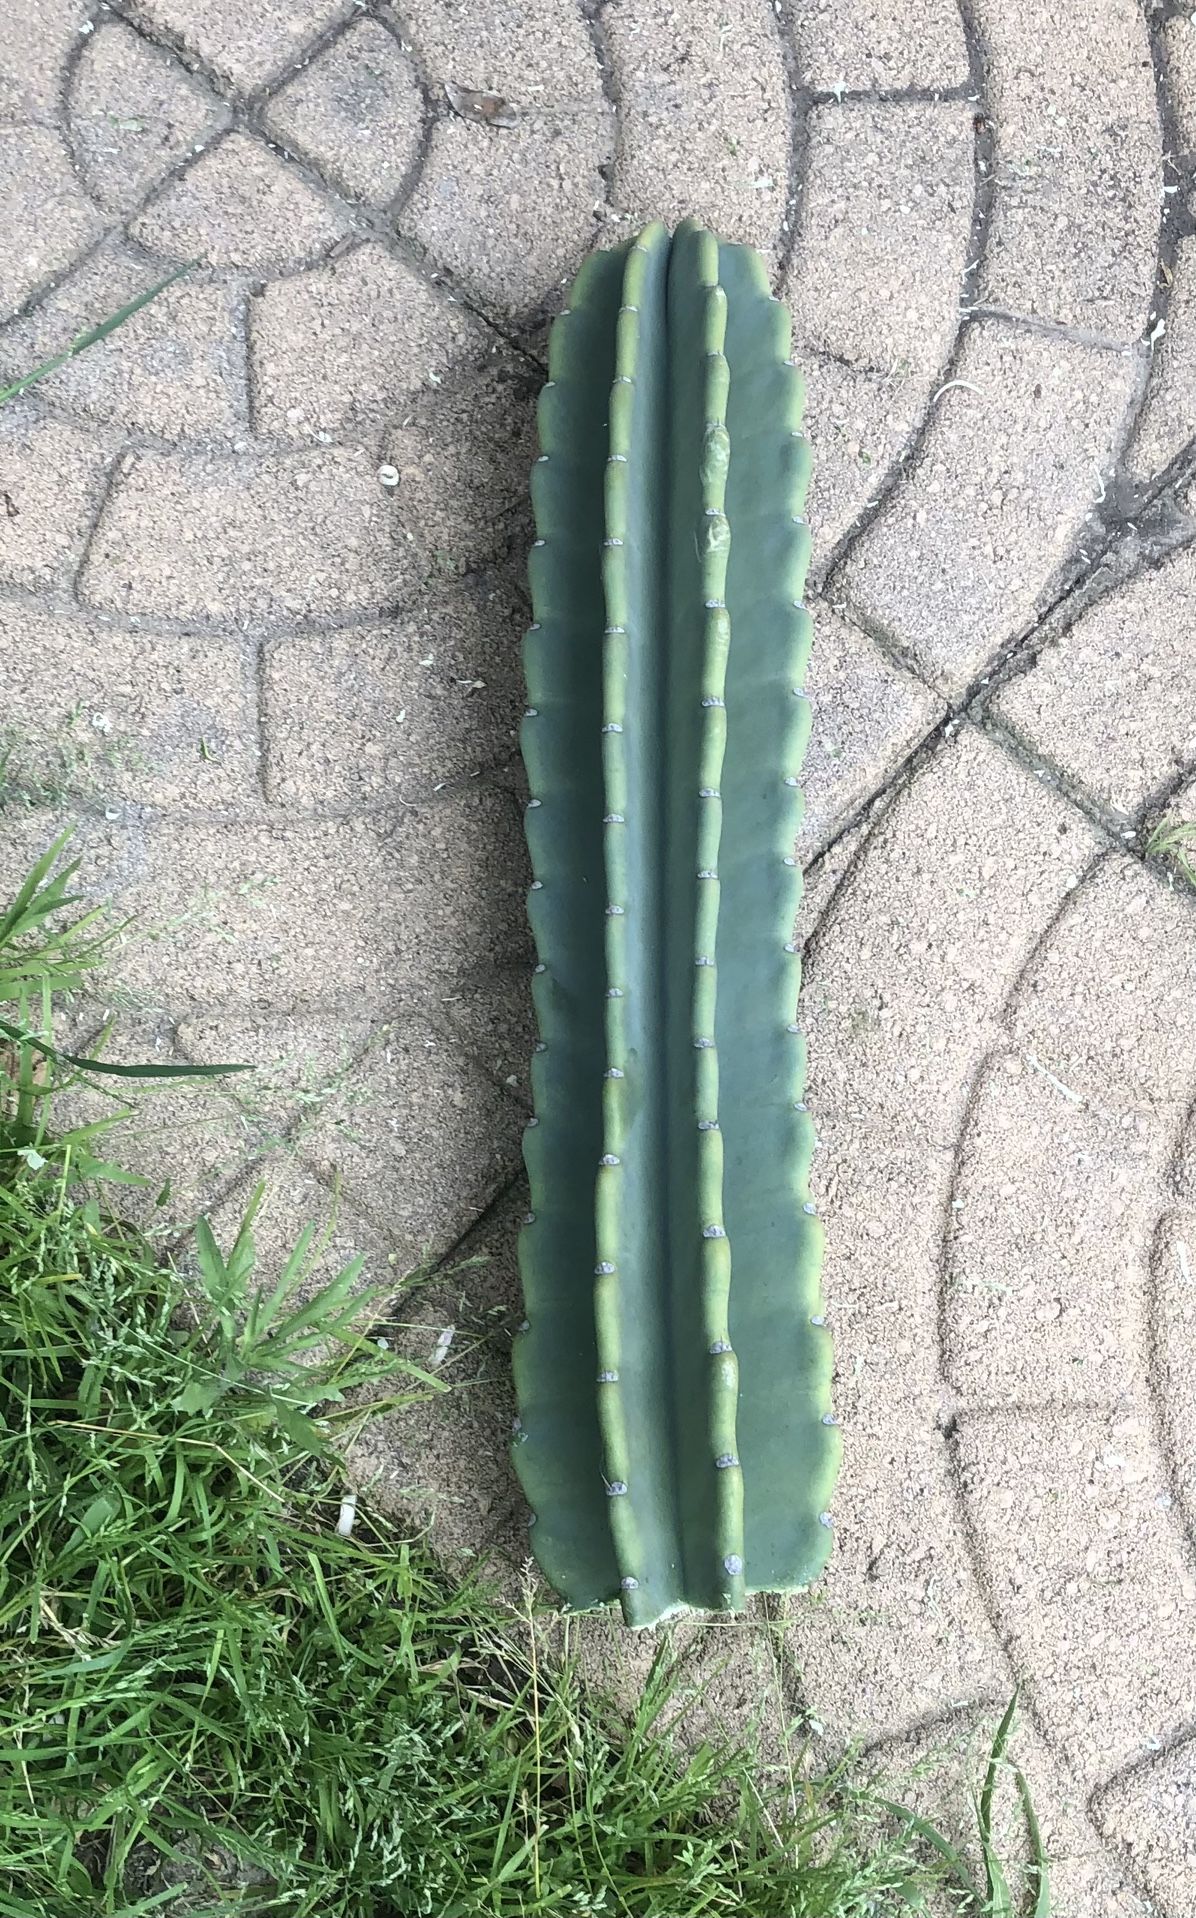 Cactus Clipping Ready To Plant Or Pot 22”